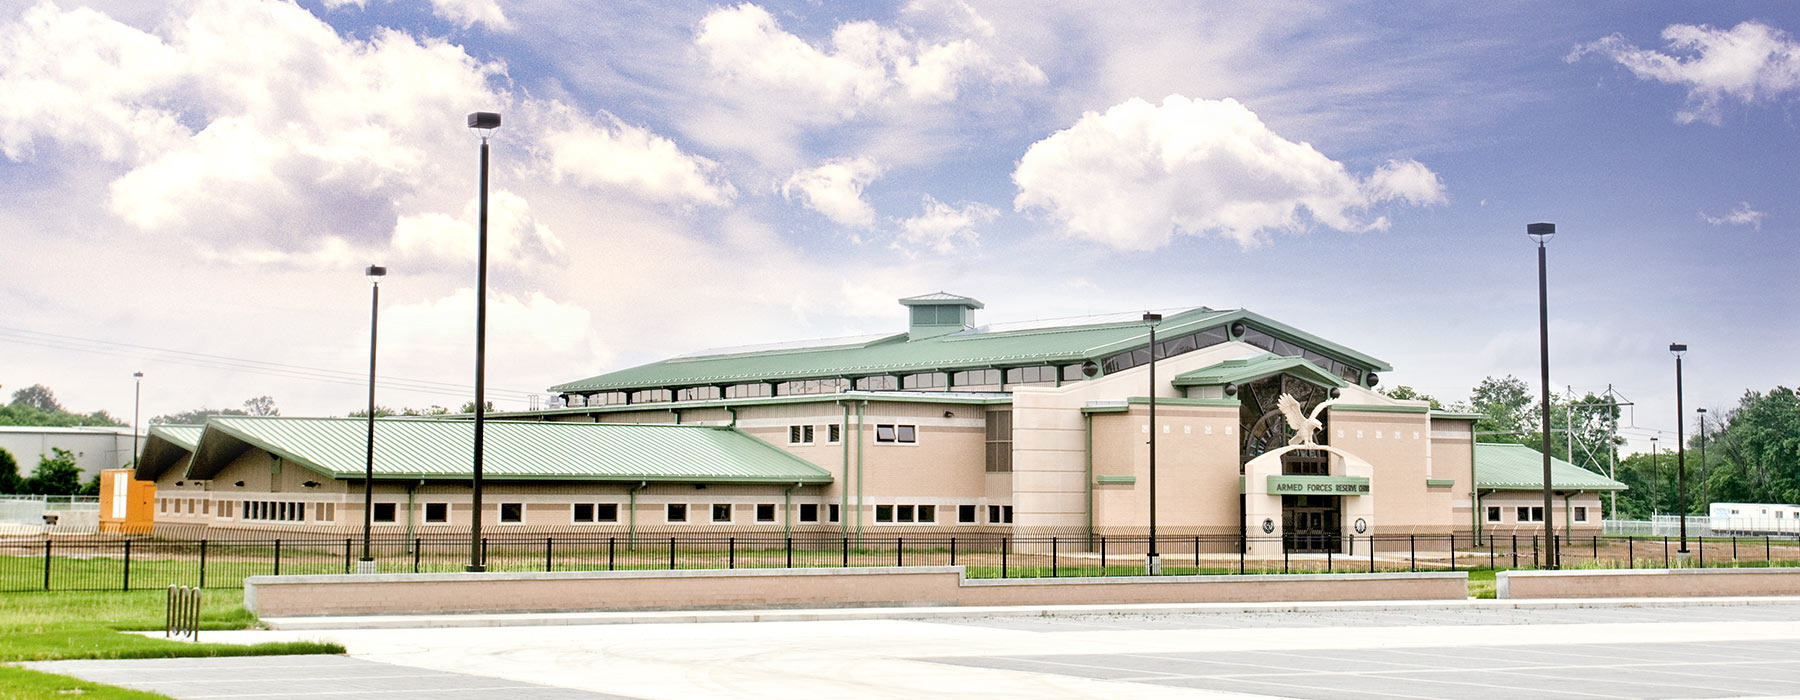 Exterior View of The Armed Forces Reserve Center in Mount Vernon, Illinois